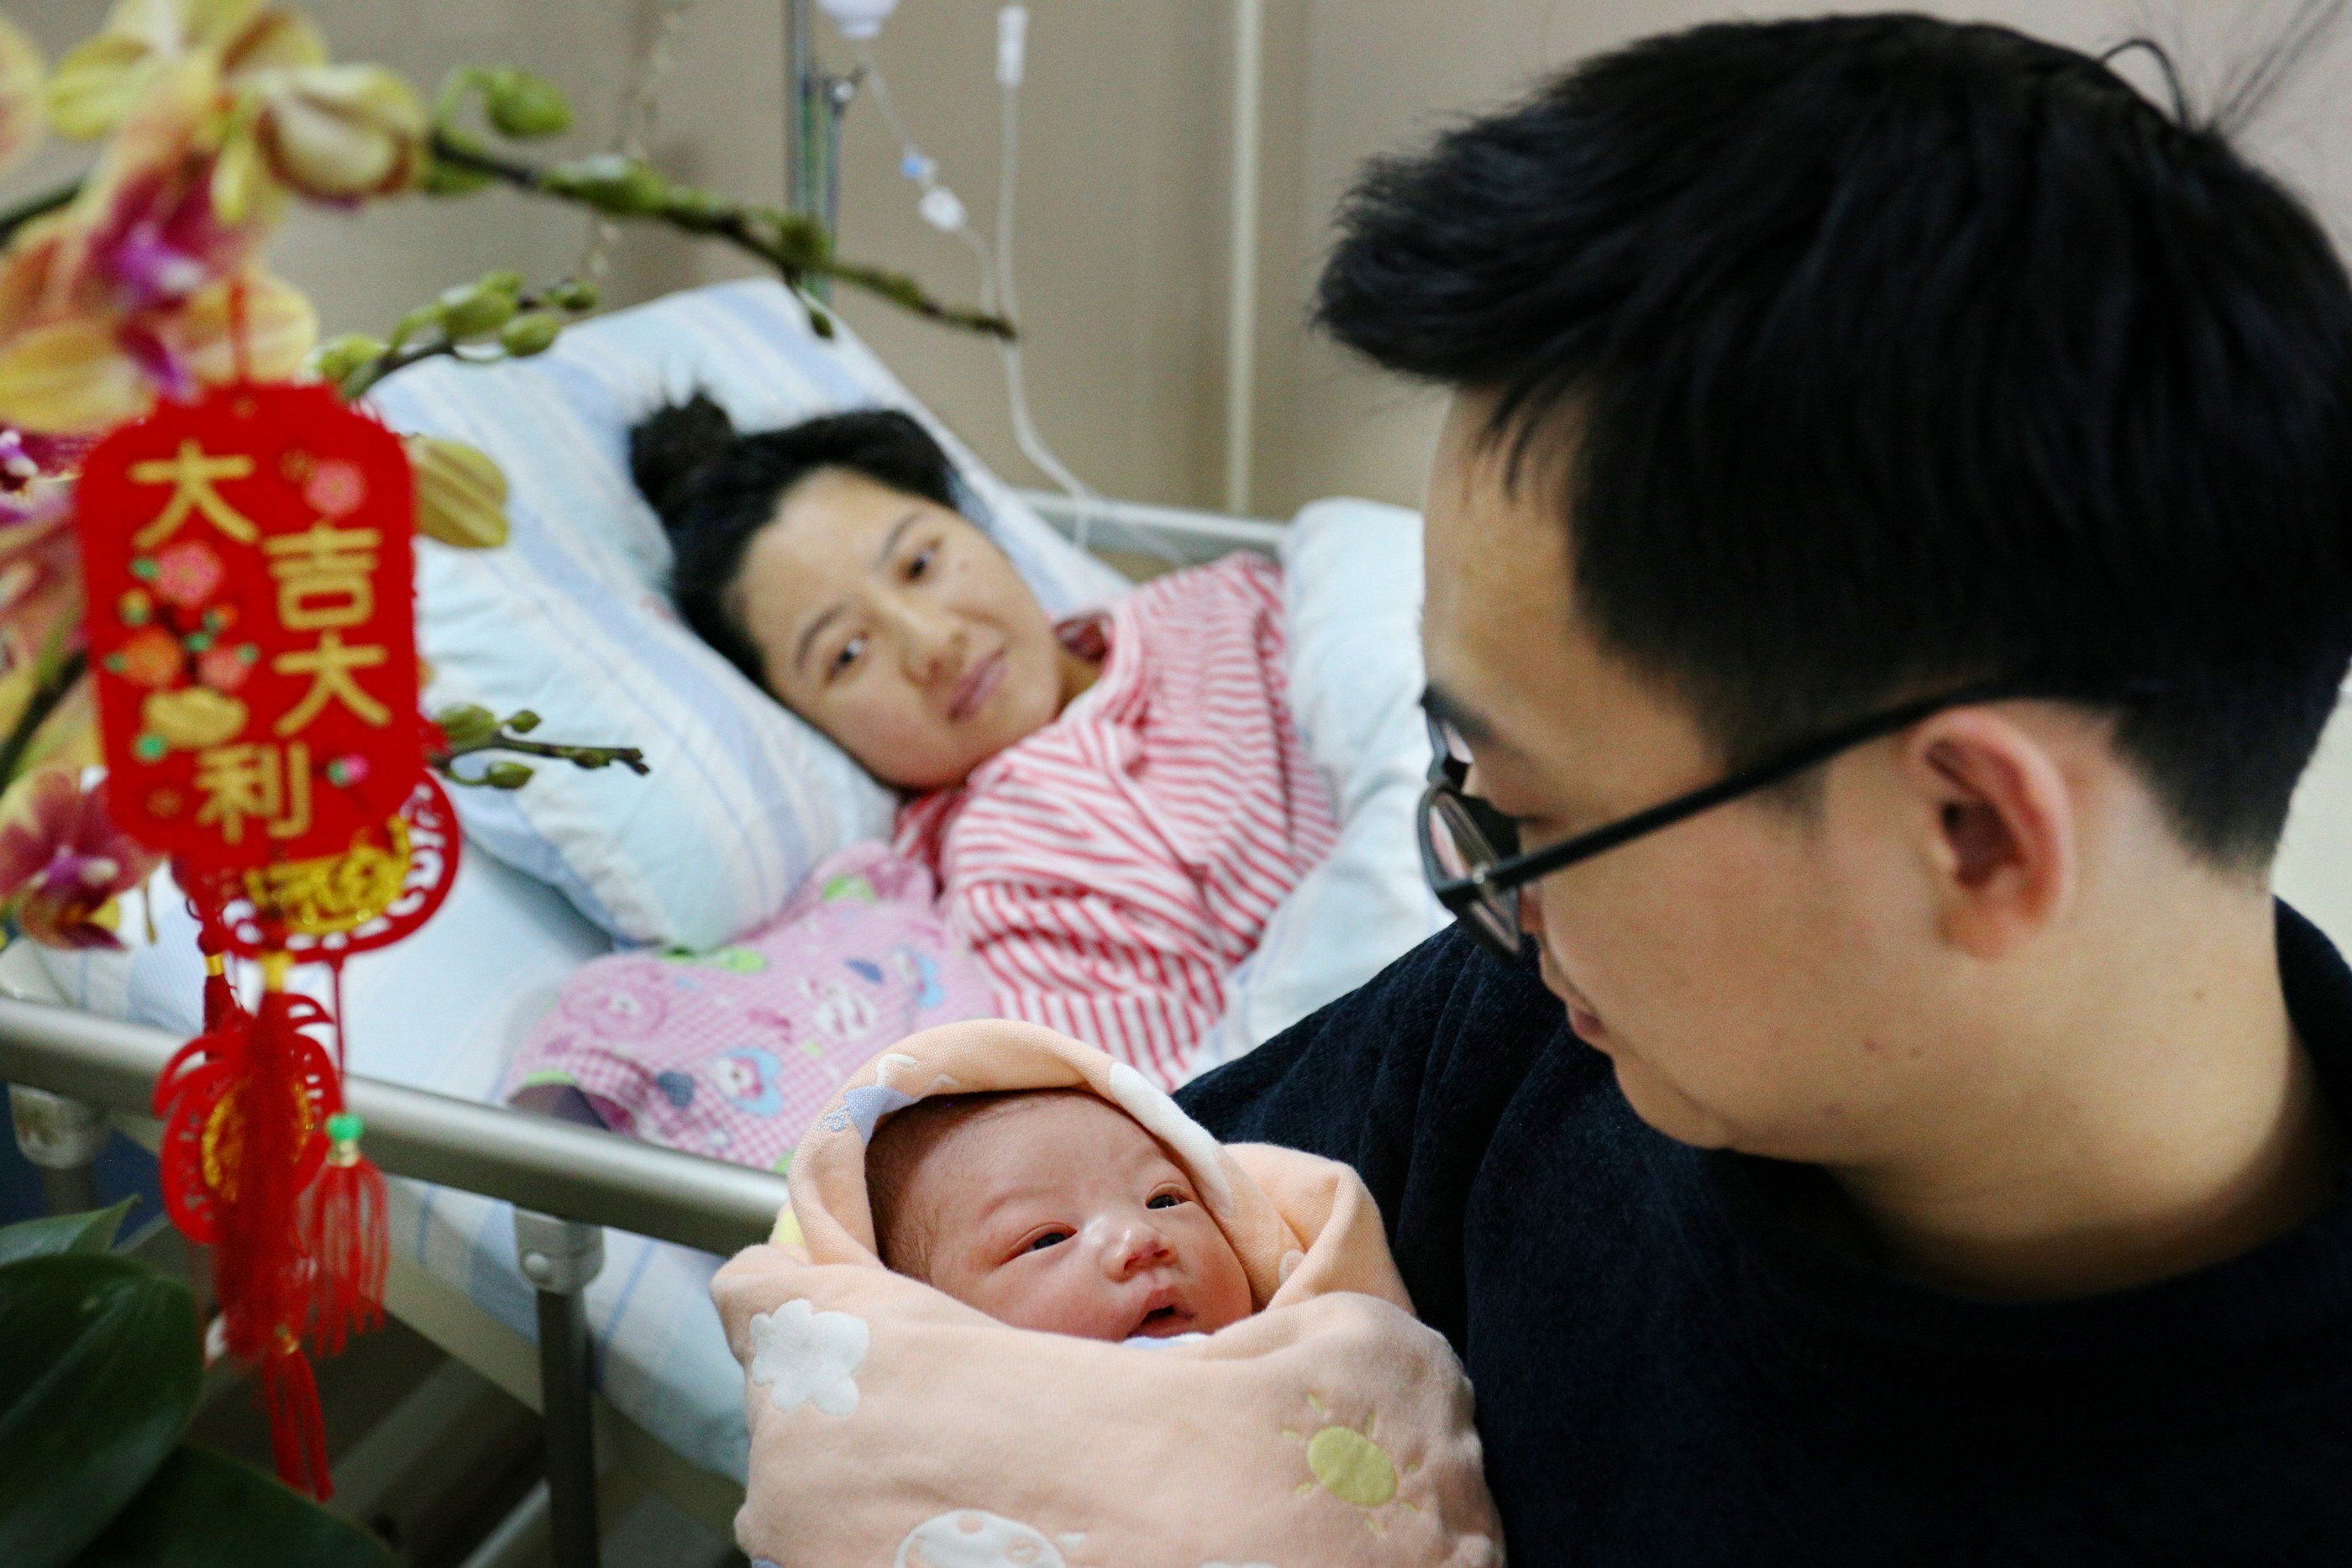 China’s declining birth rate has been a perpetual headache for policymakers. Photo: Xinhua